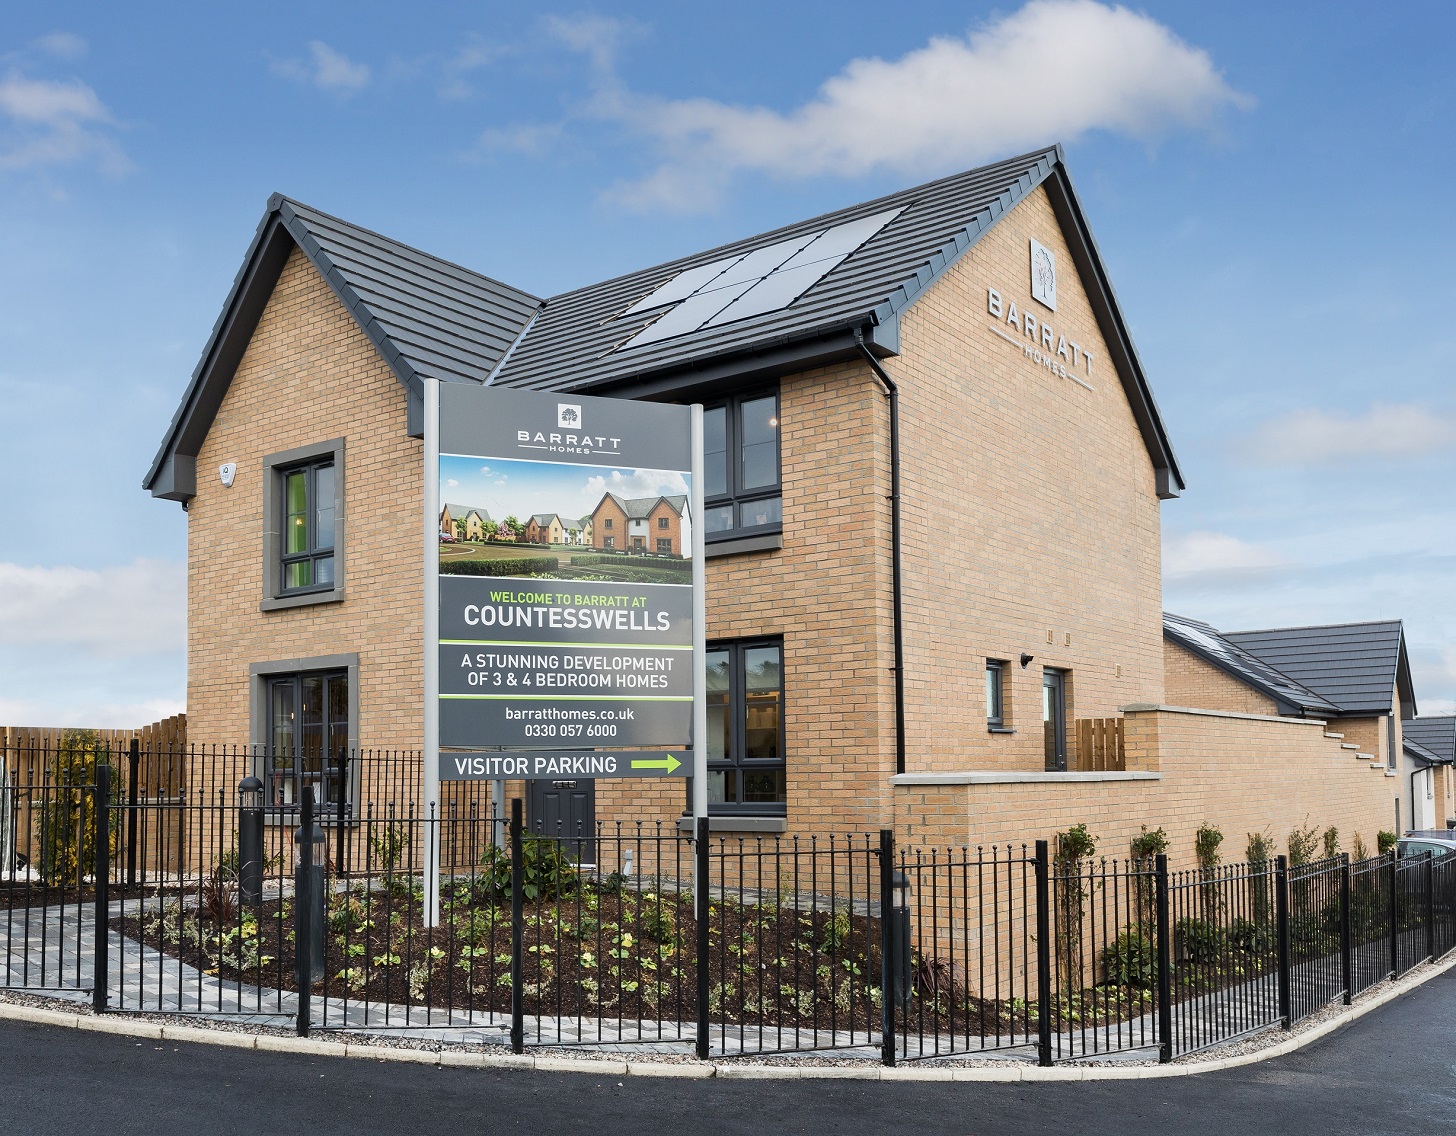 Barratt Developments profits 'in line with expectations' but outlook 'less certain'